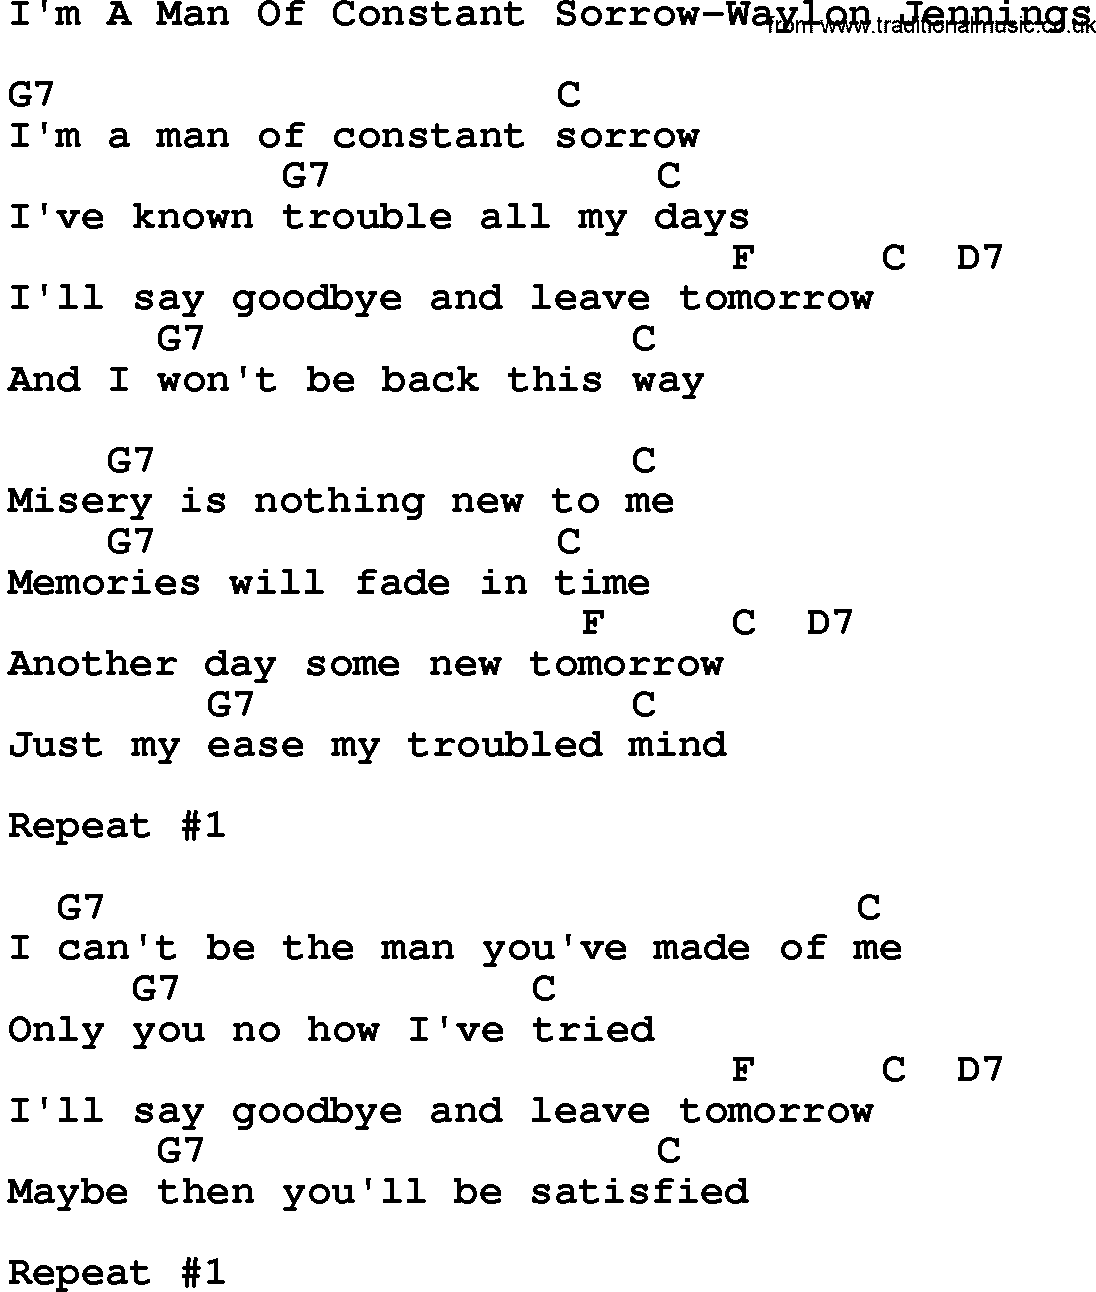 Country music song: I'm A Man Of Constant Sorrow-Waylon Jennings lyrics and chords